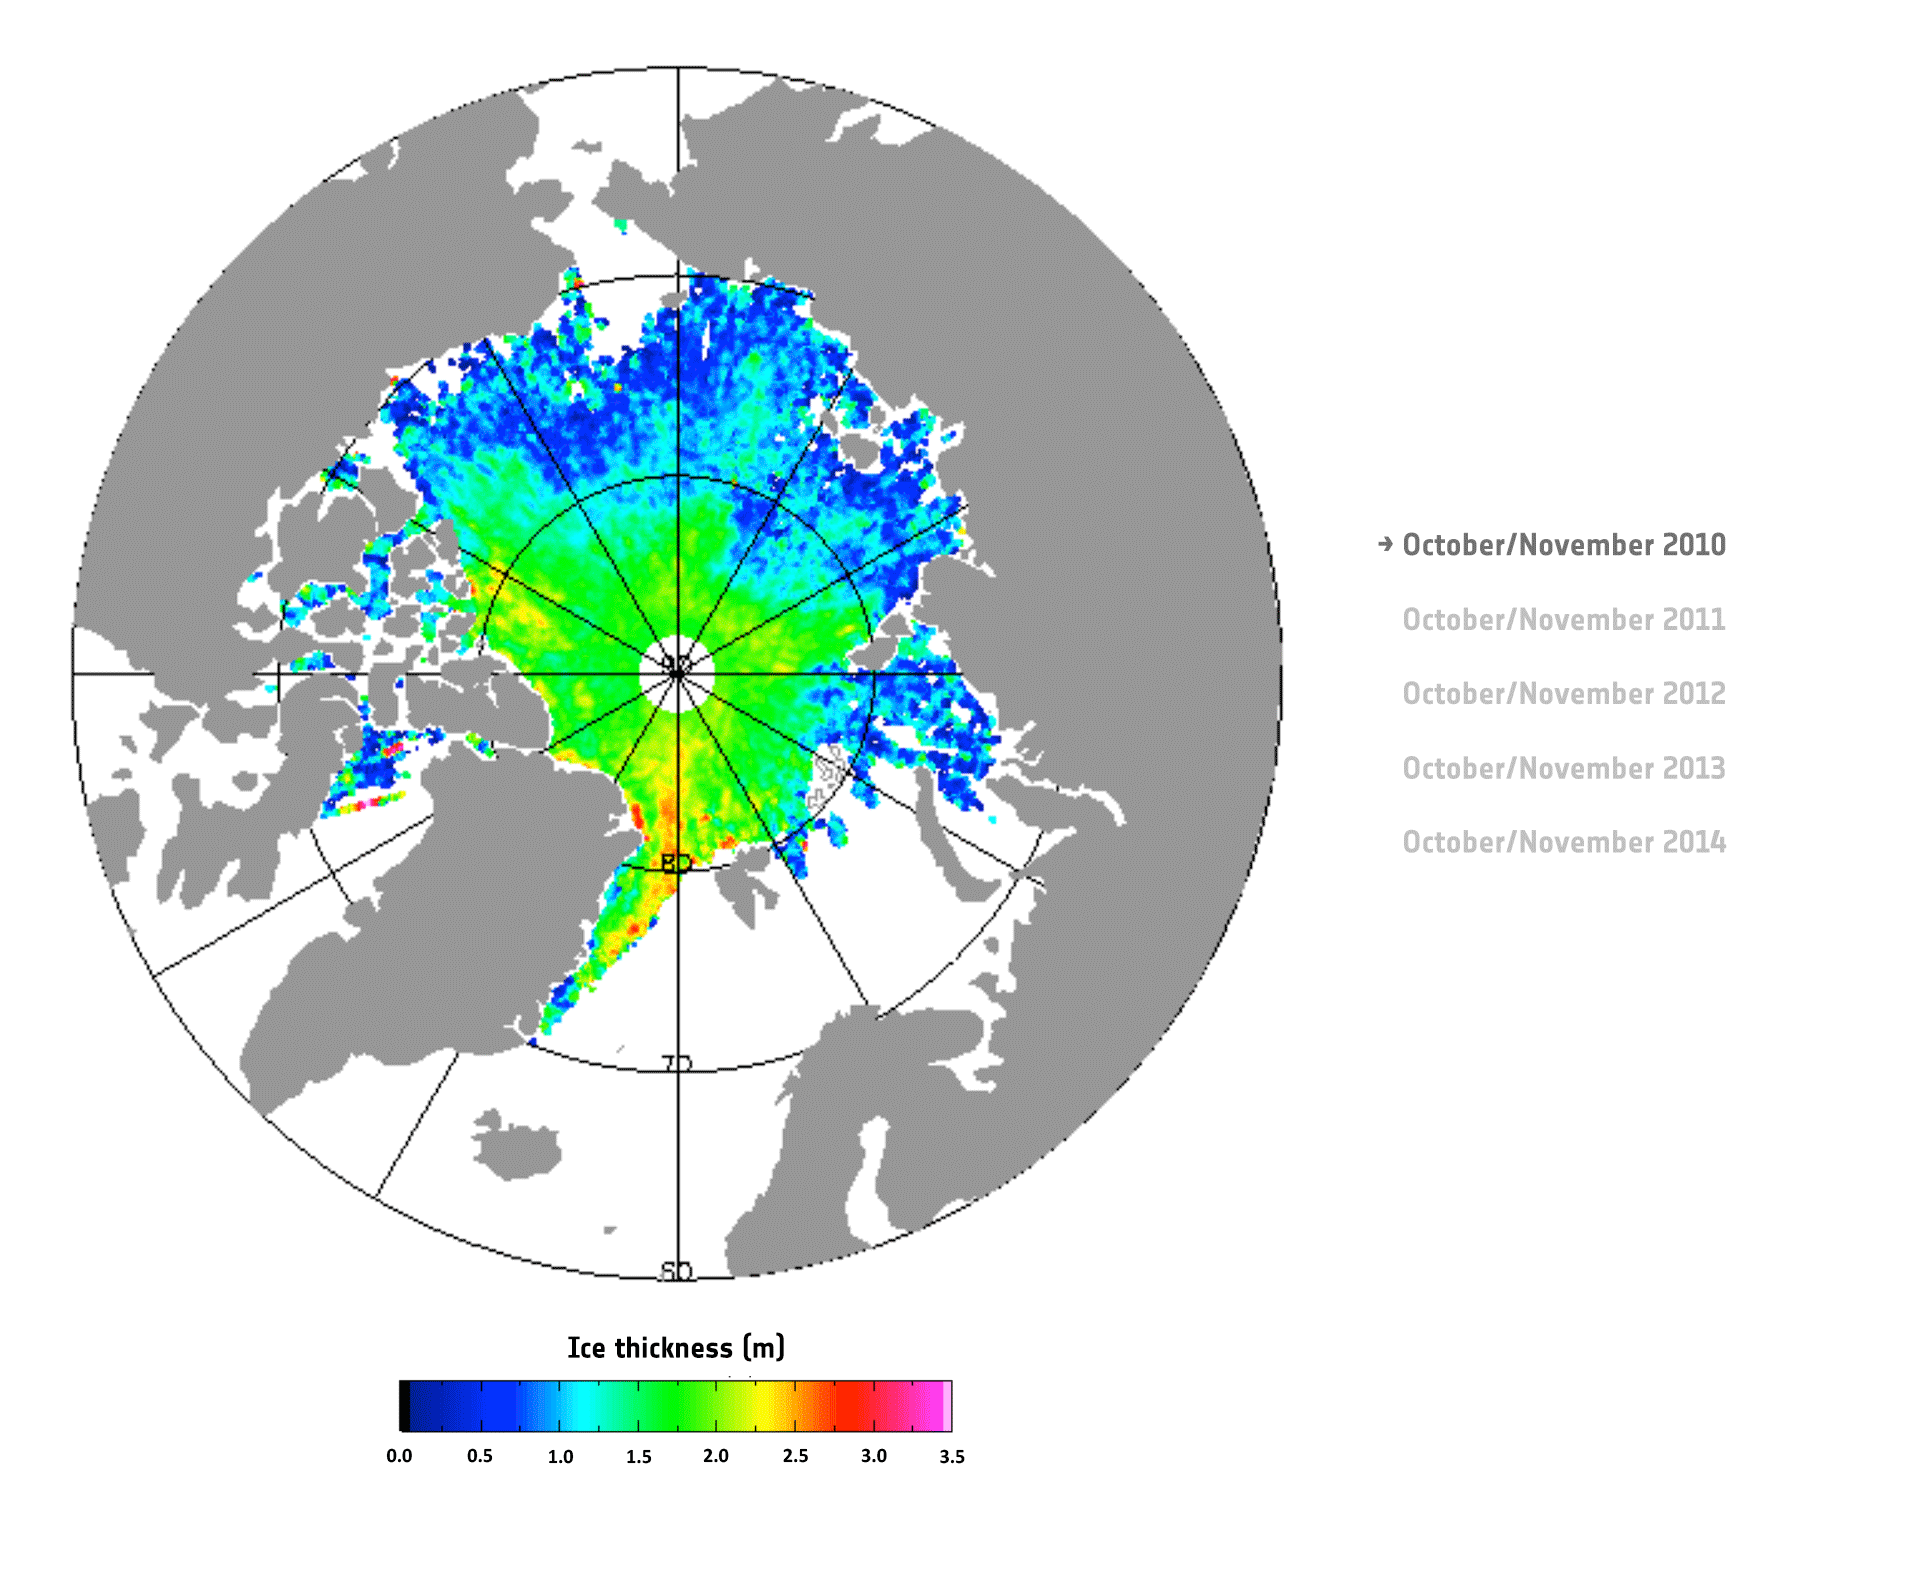 Five years ice-thickness change